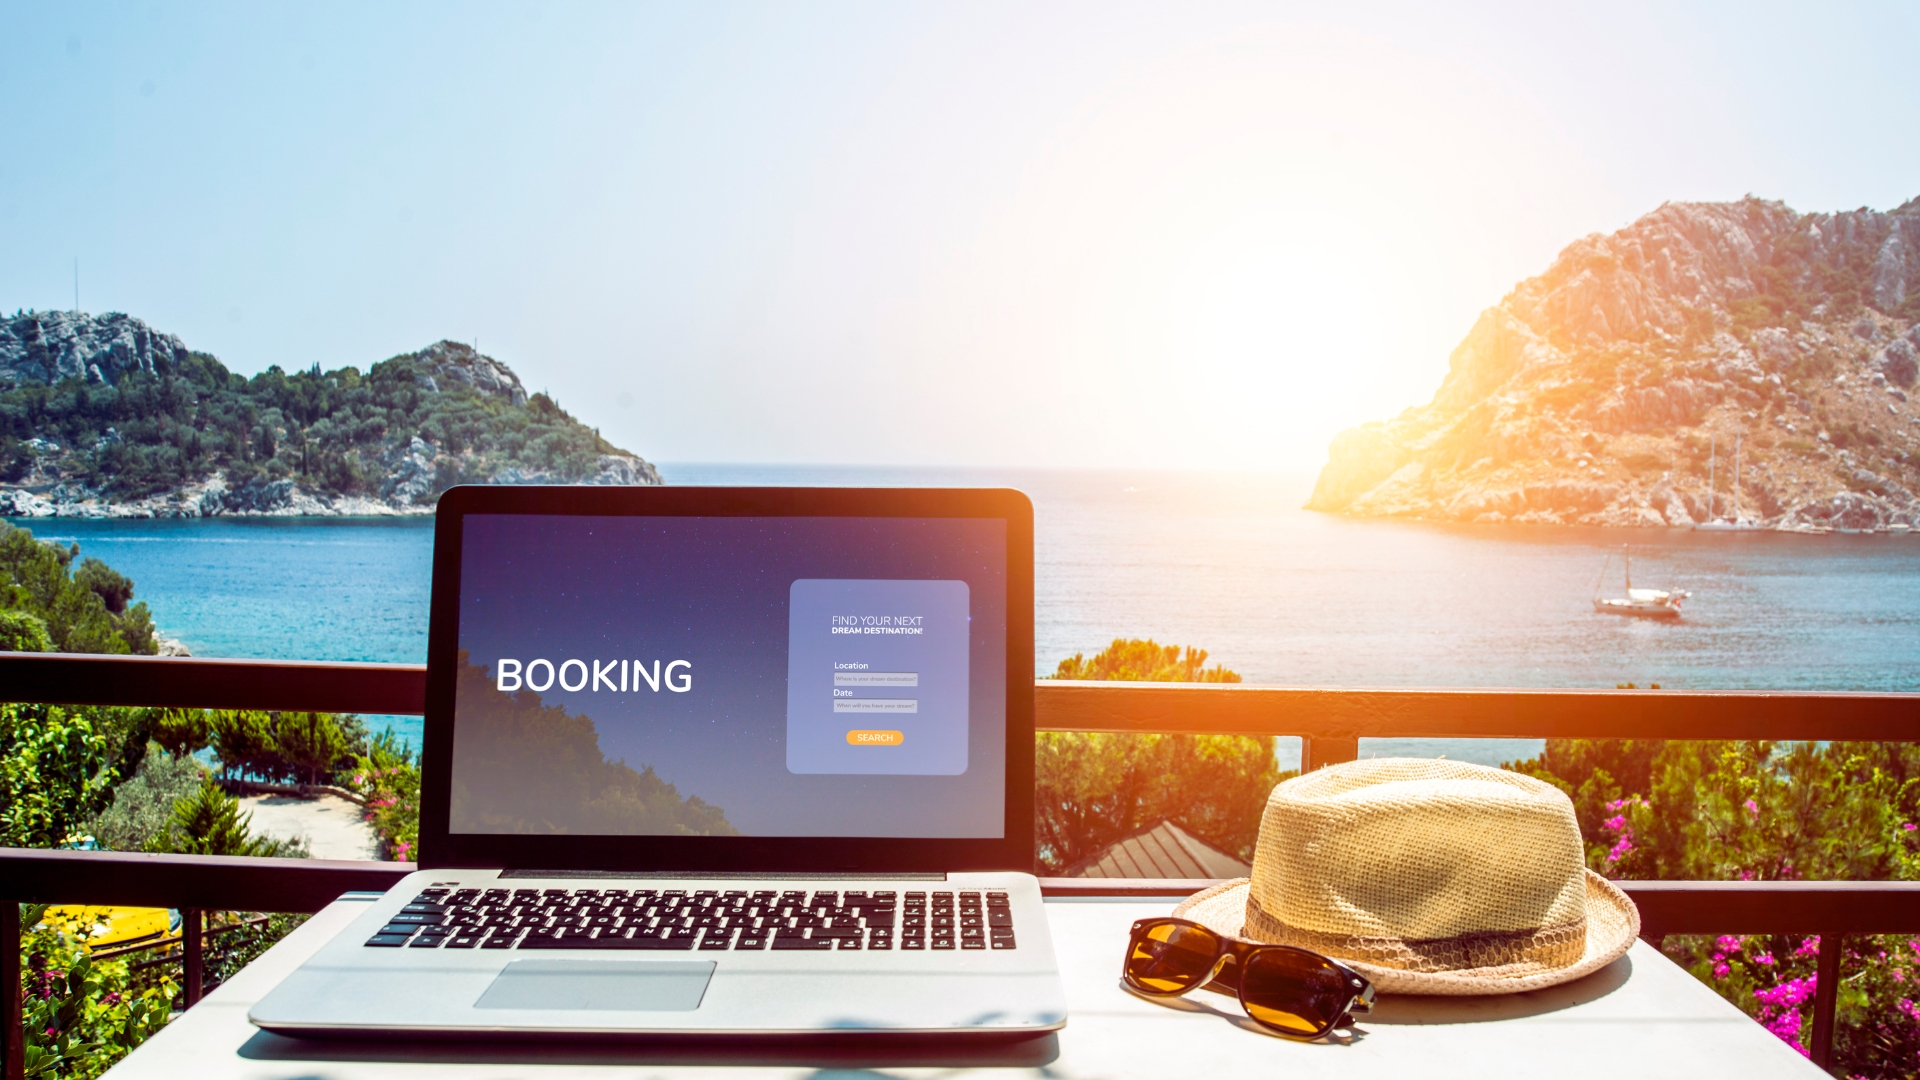 Laptop on a hotel with amazing beach view displaying OTA (Online Travel Agency) interface